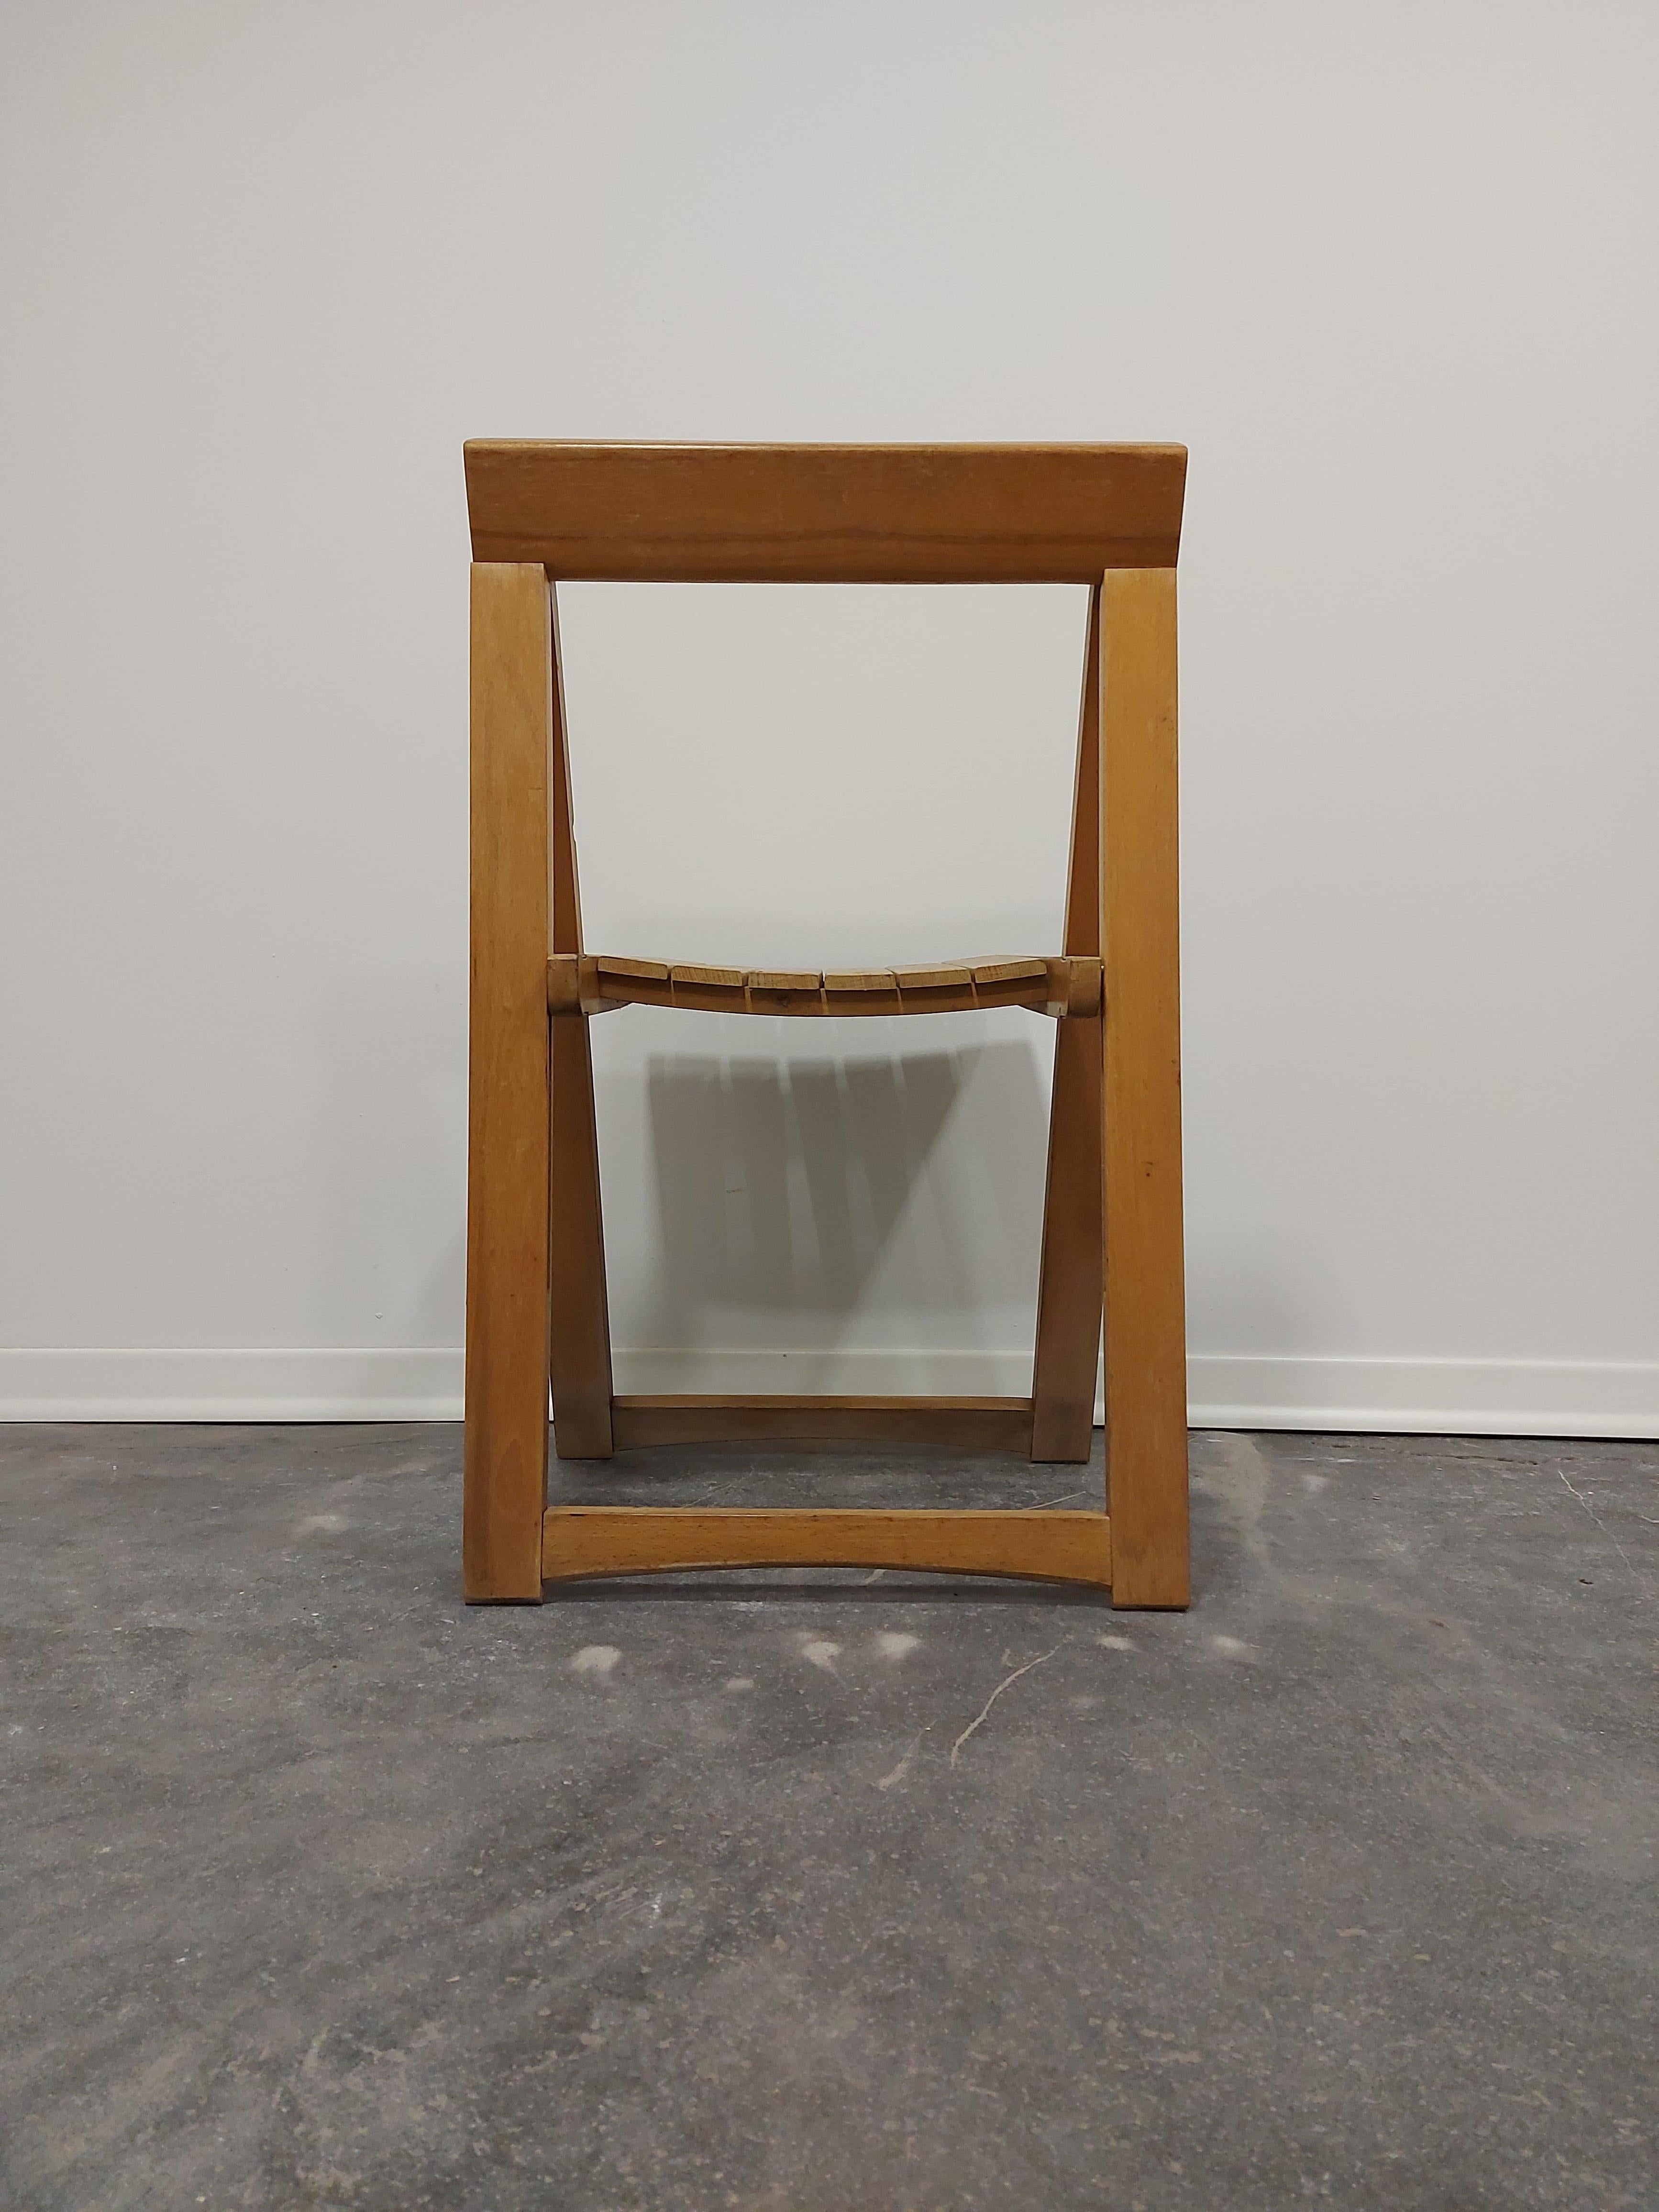 Folding Chair by Aldo Jacober, 1970s 1 of 4 For Sale 2